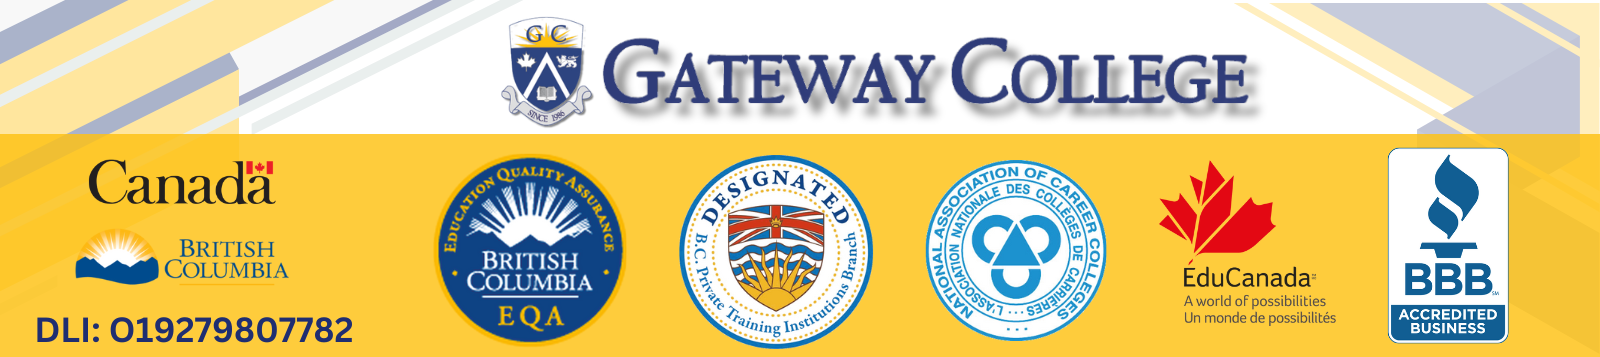 Gateway College recognized by these organizations